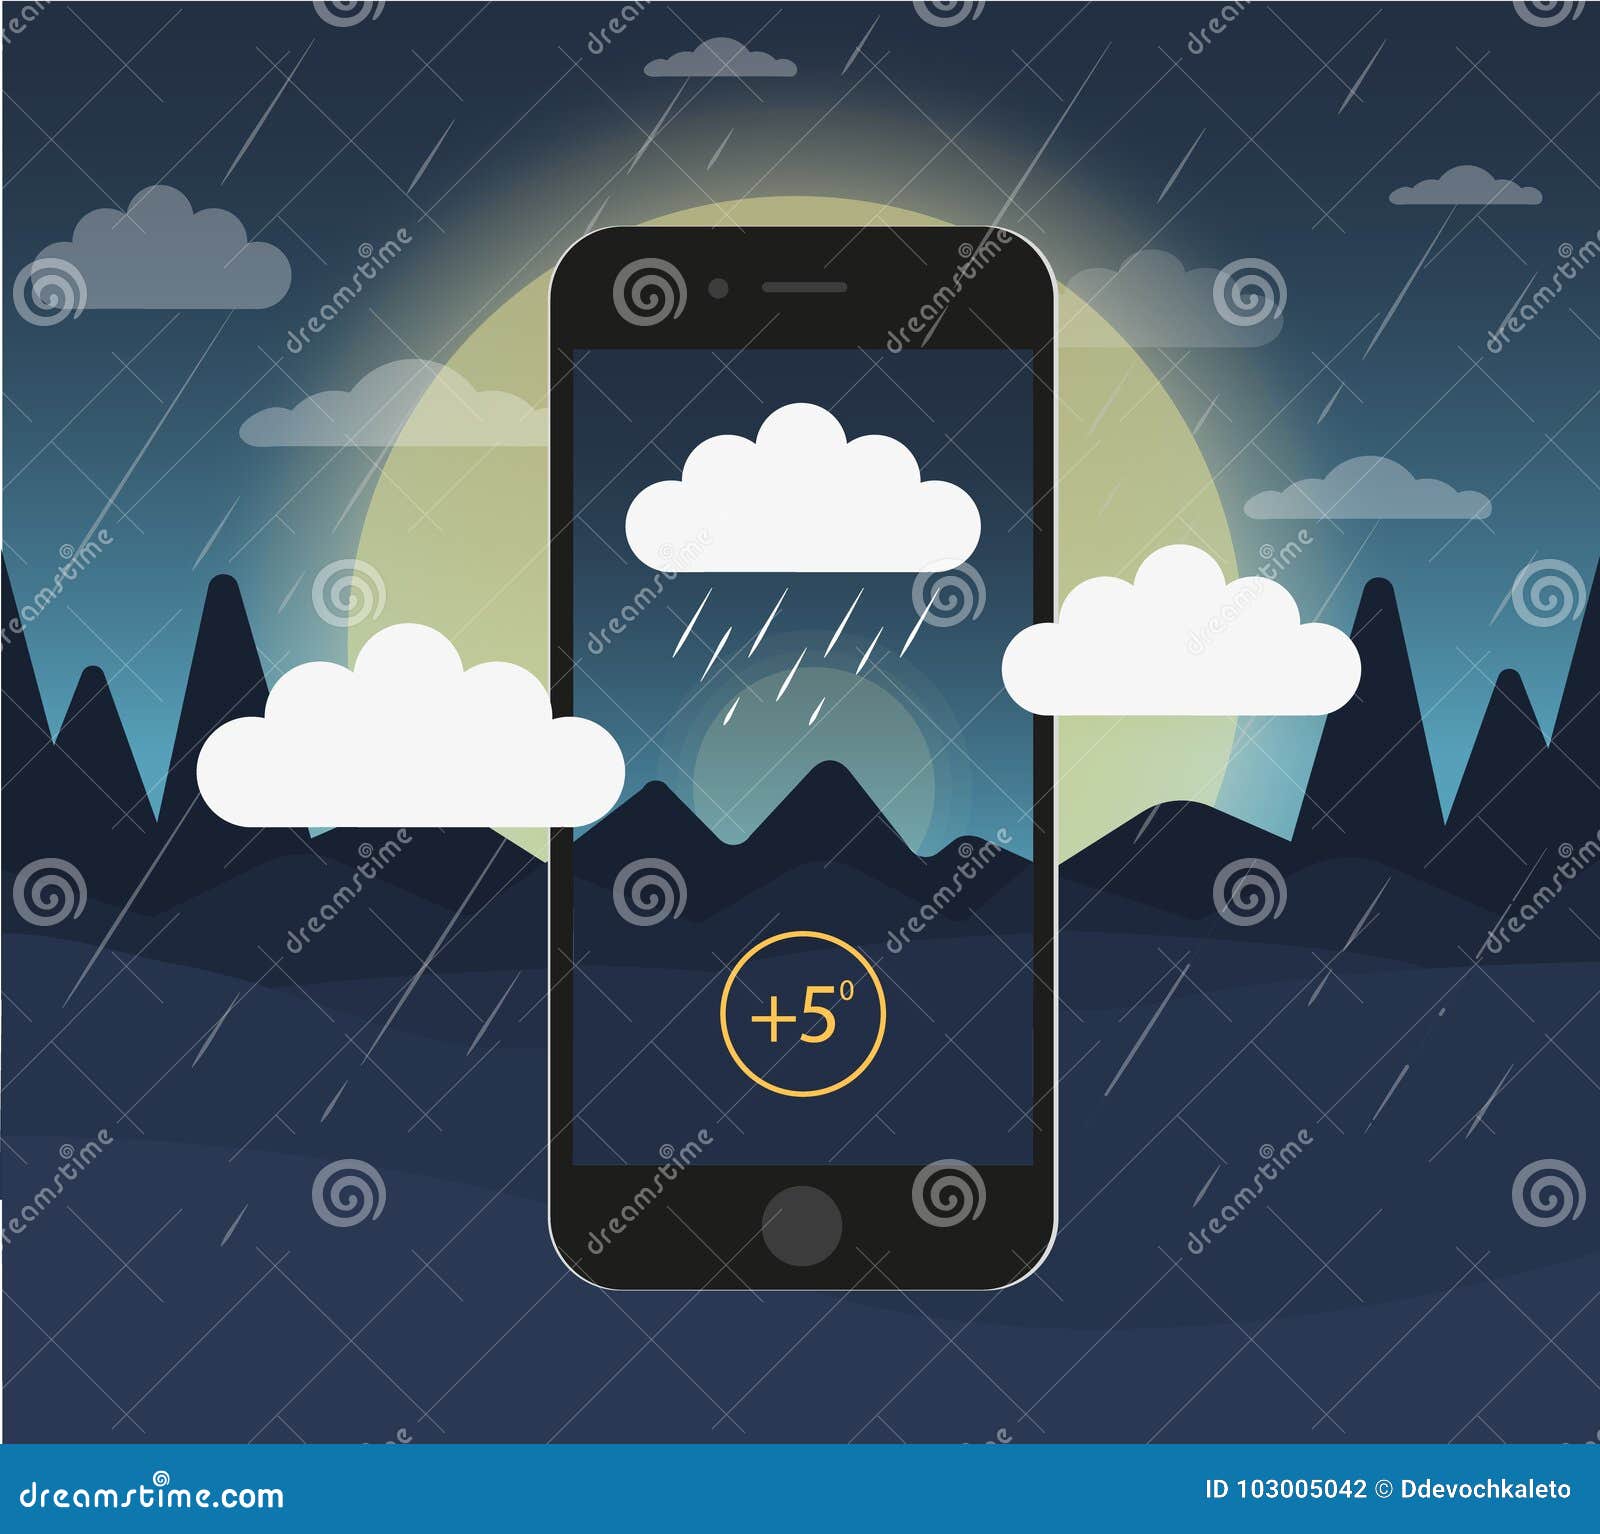 Ux Desidn for Weather Forecast App Stock Vector - Illustration of background,  icon: 103005042